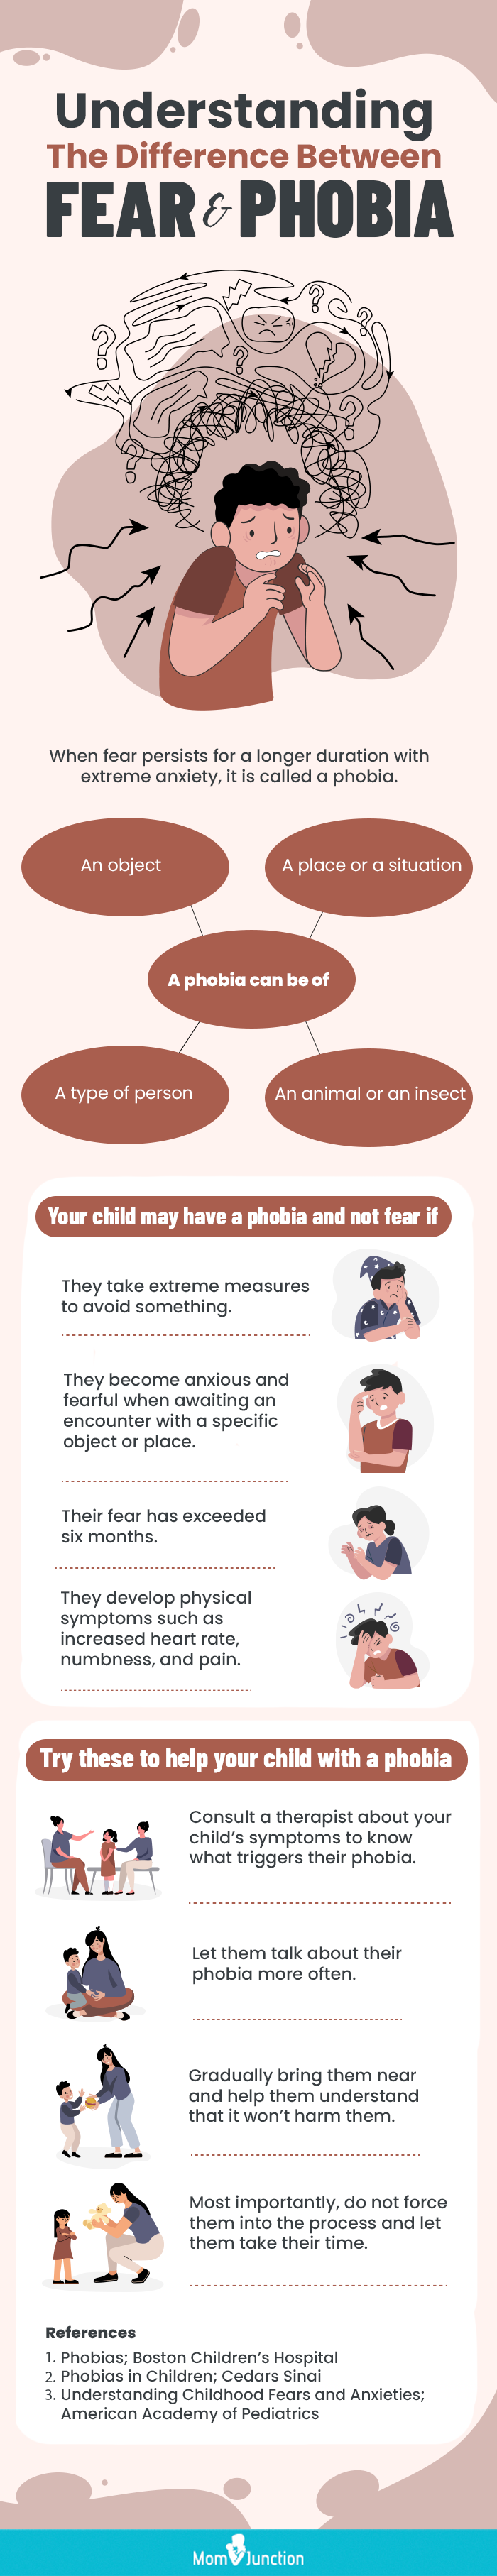 understanding the difference between fear and phobia [infographic]